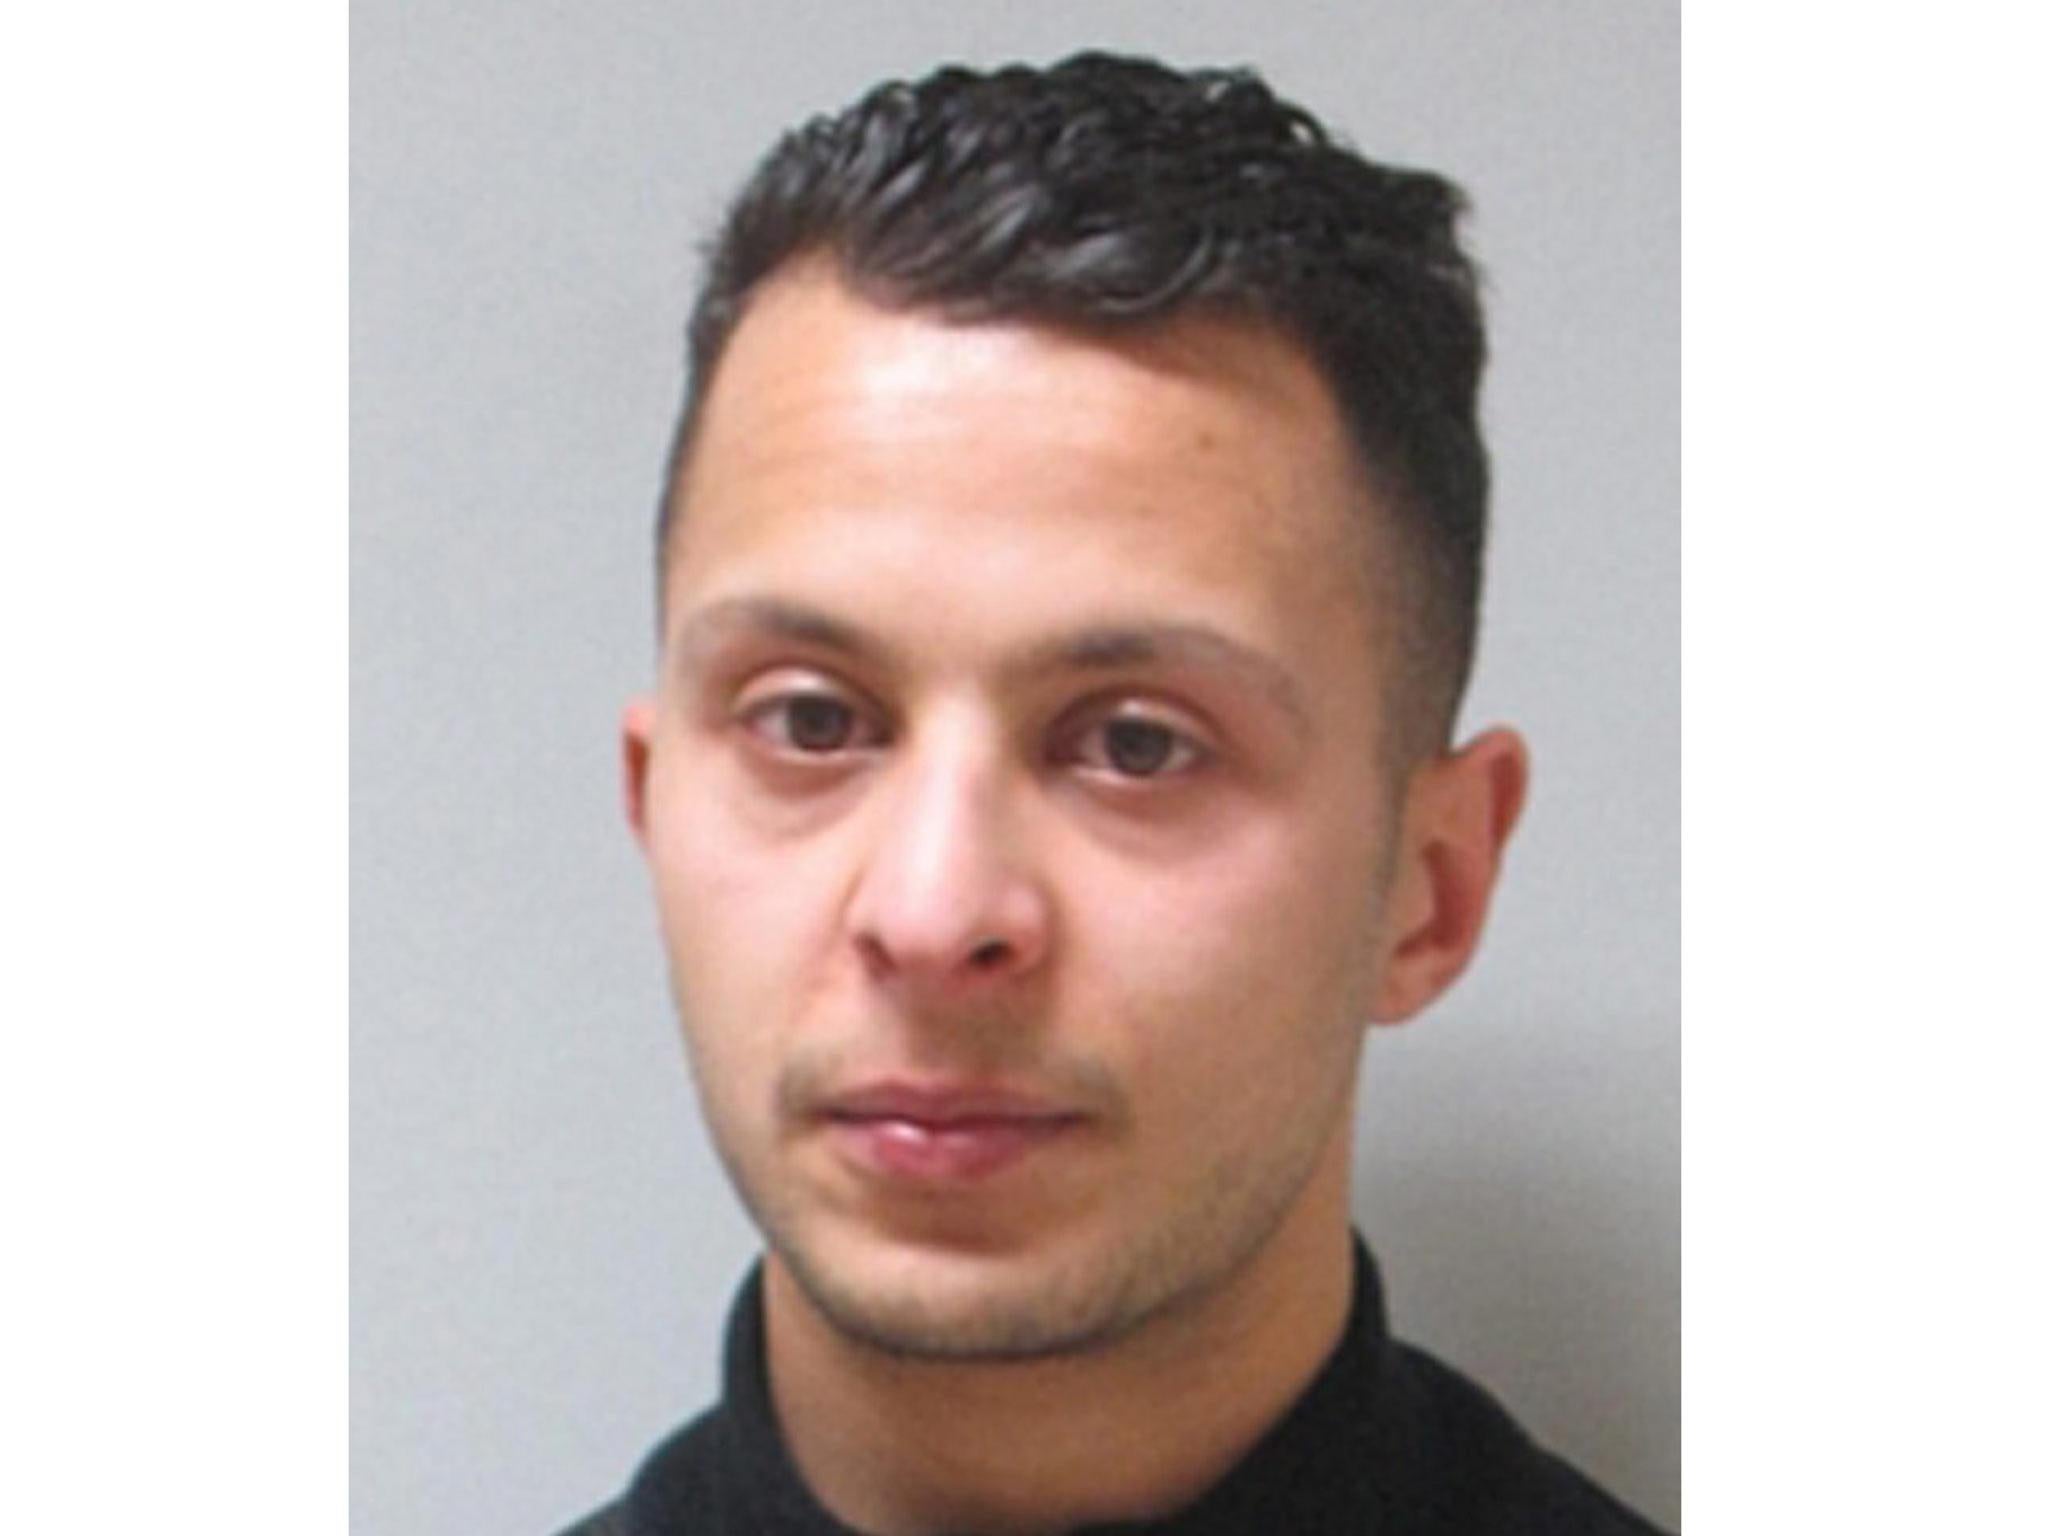 Salah Abdeslam had previously agreed to turn supergrass, his lawyers said